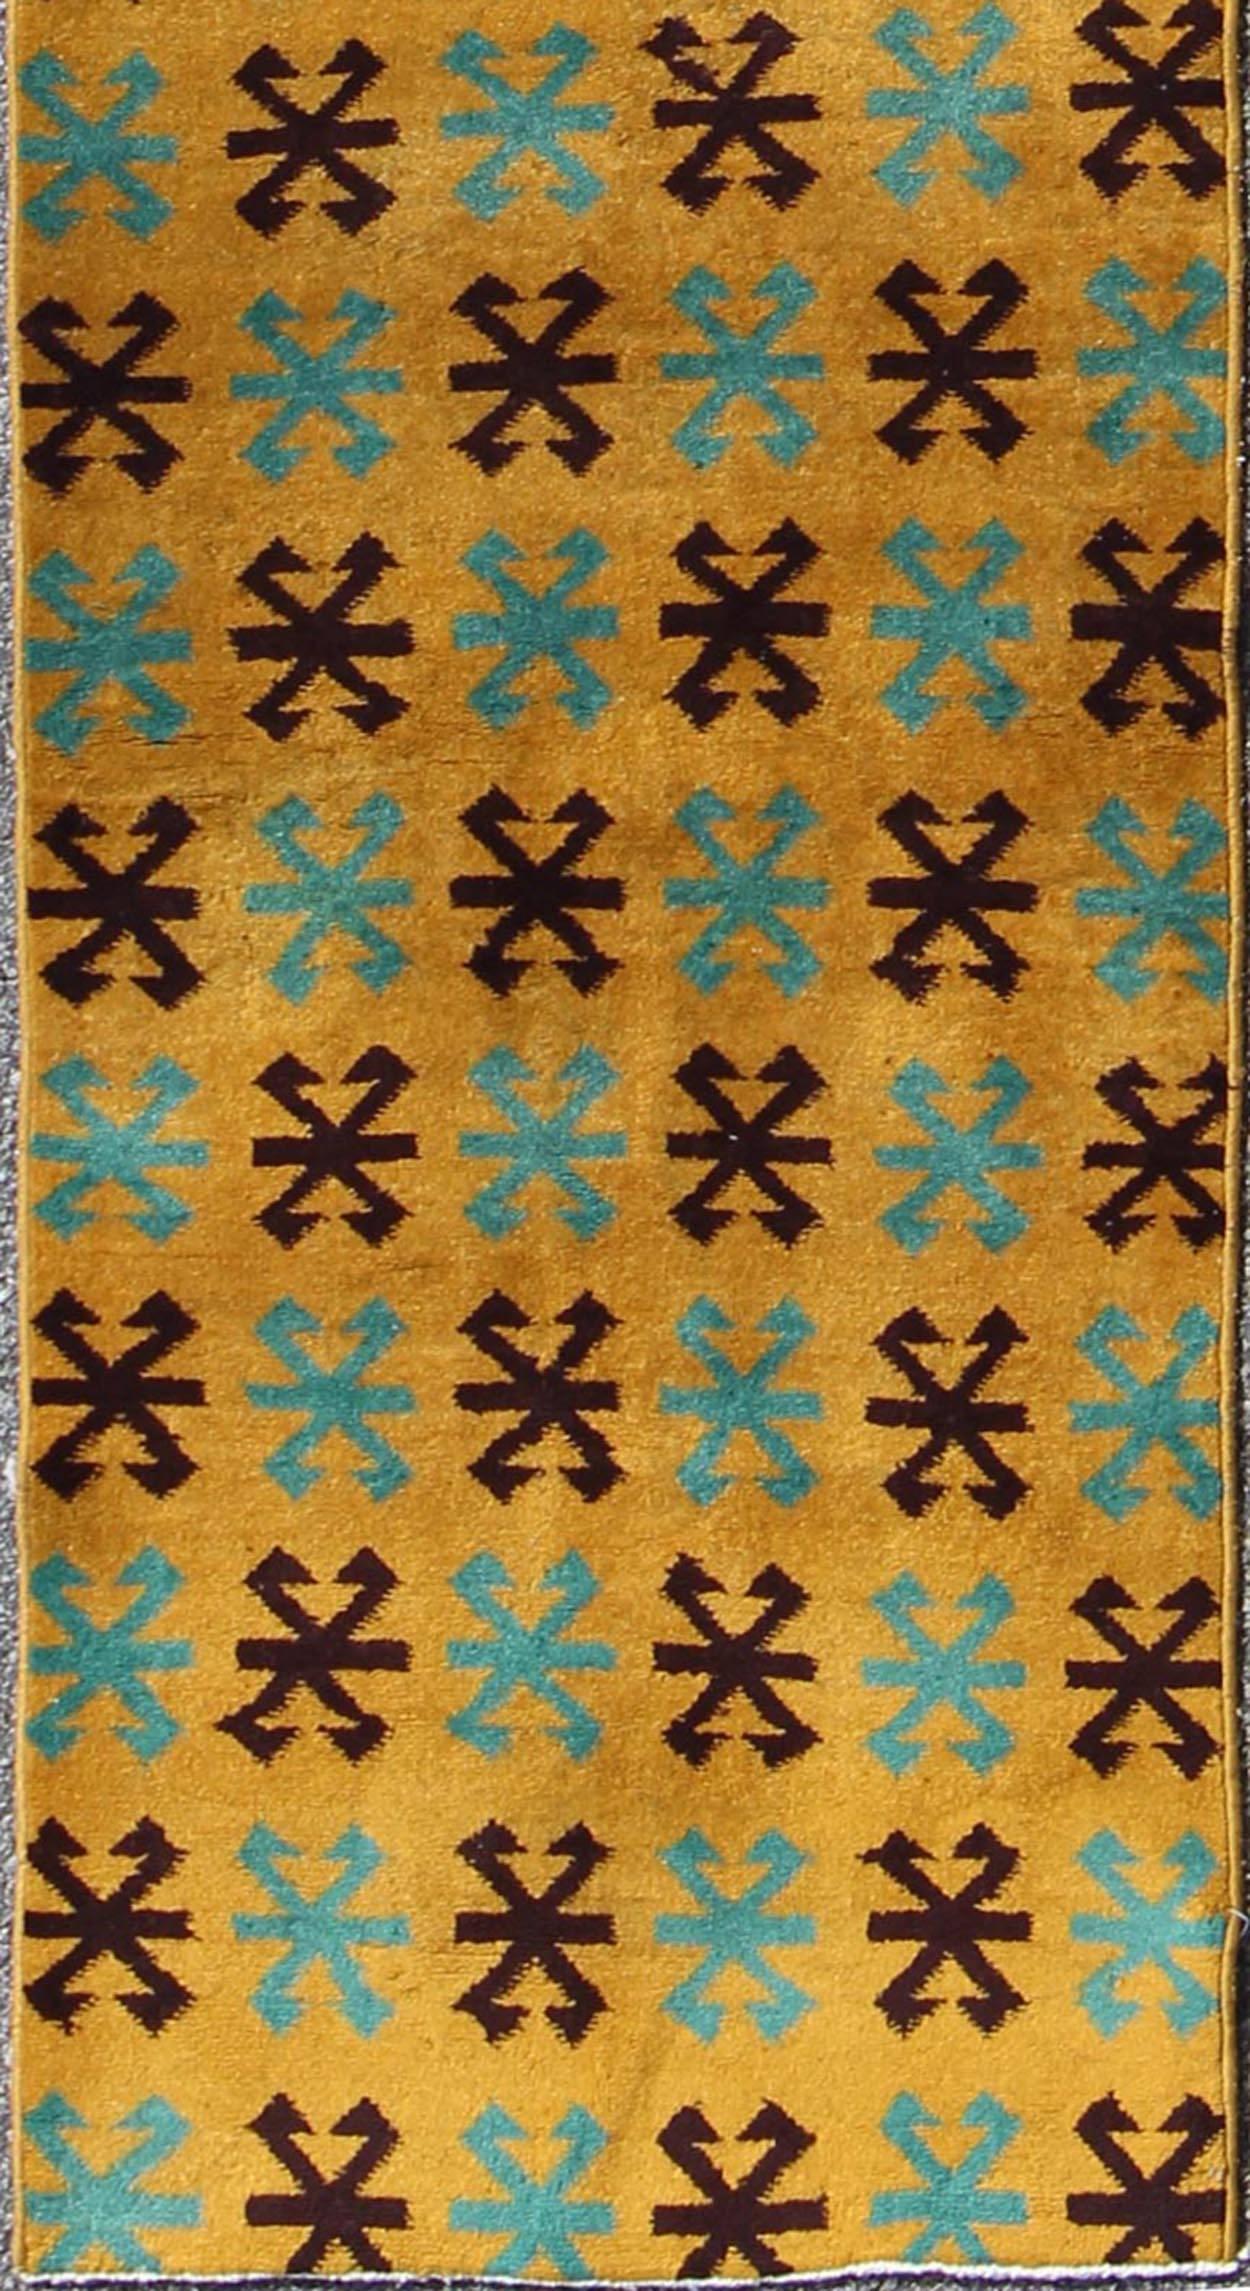 Measures: 2'7 x 13'9.
This artfully handwoven Turkish mid century design runner displays a unique geometric design and color combination, featuring yellow background and repeating teal/Turquoise and black motifs, rendering this piece finely suited